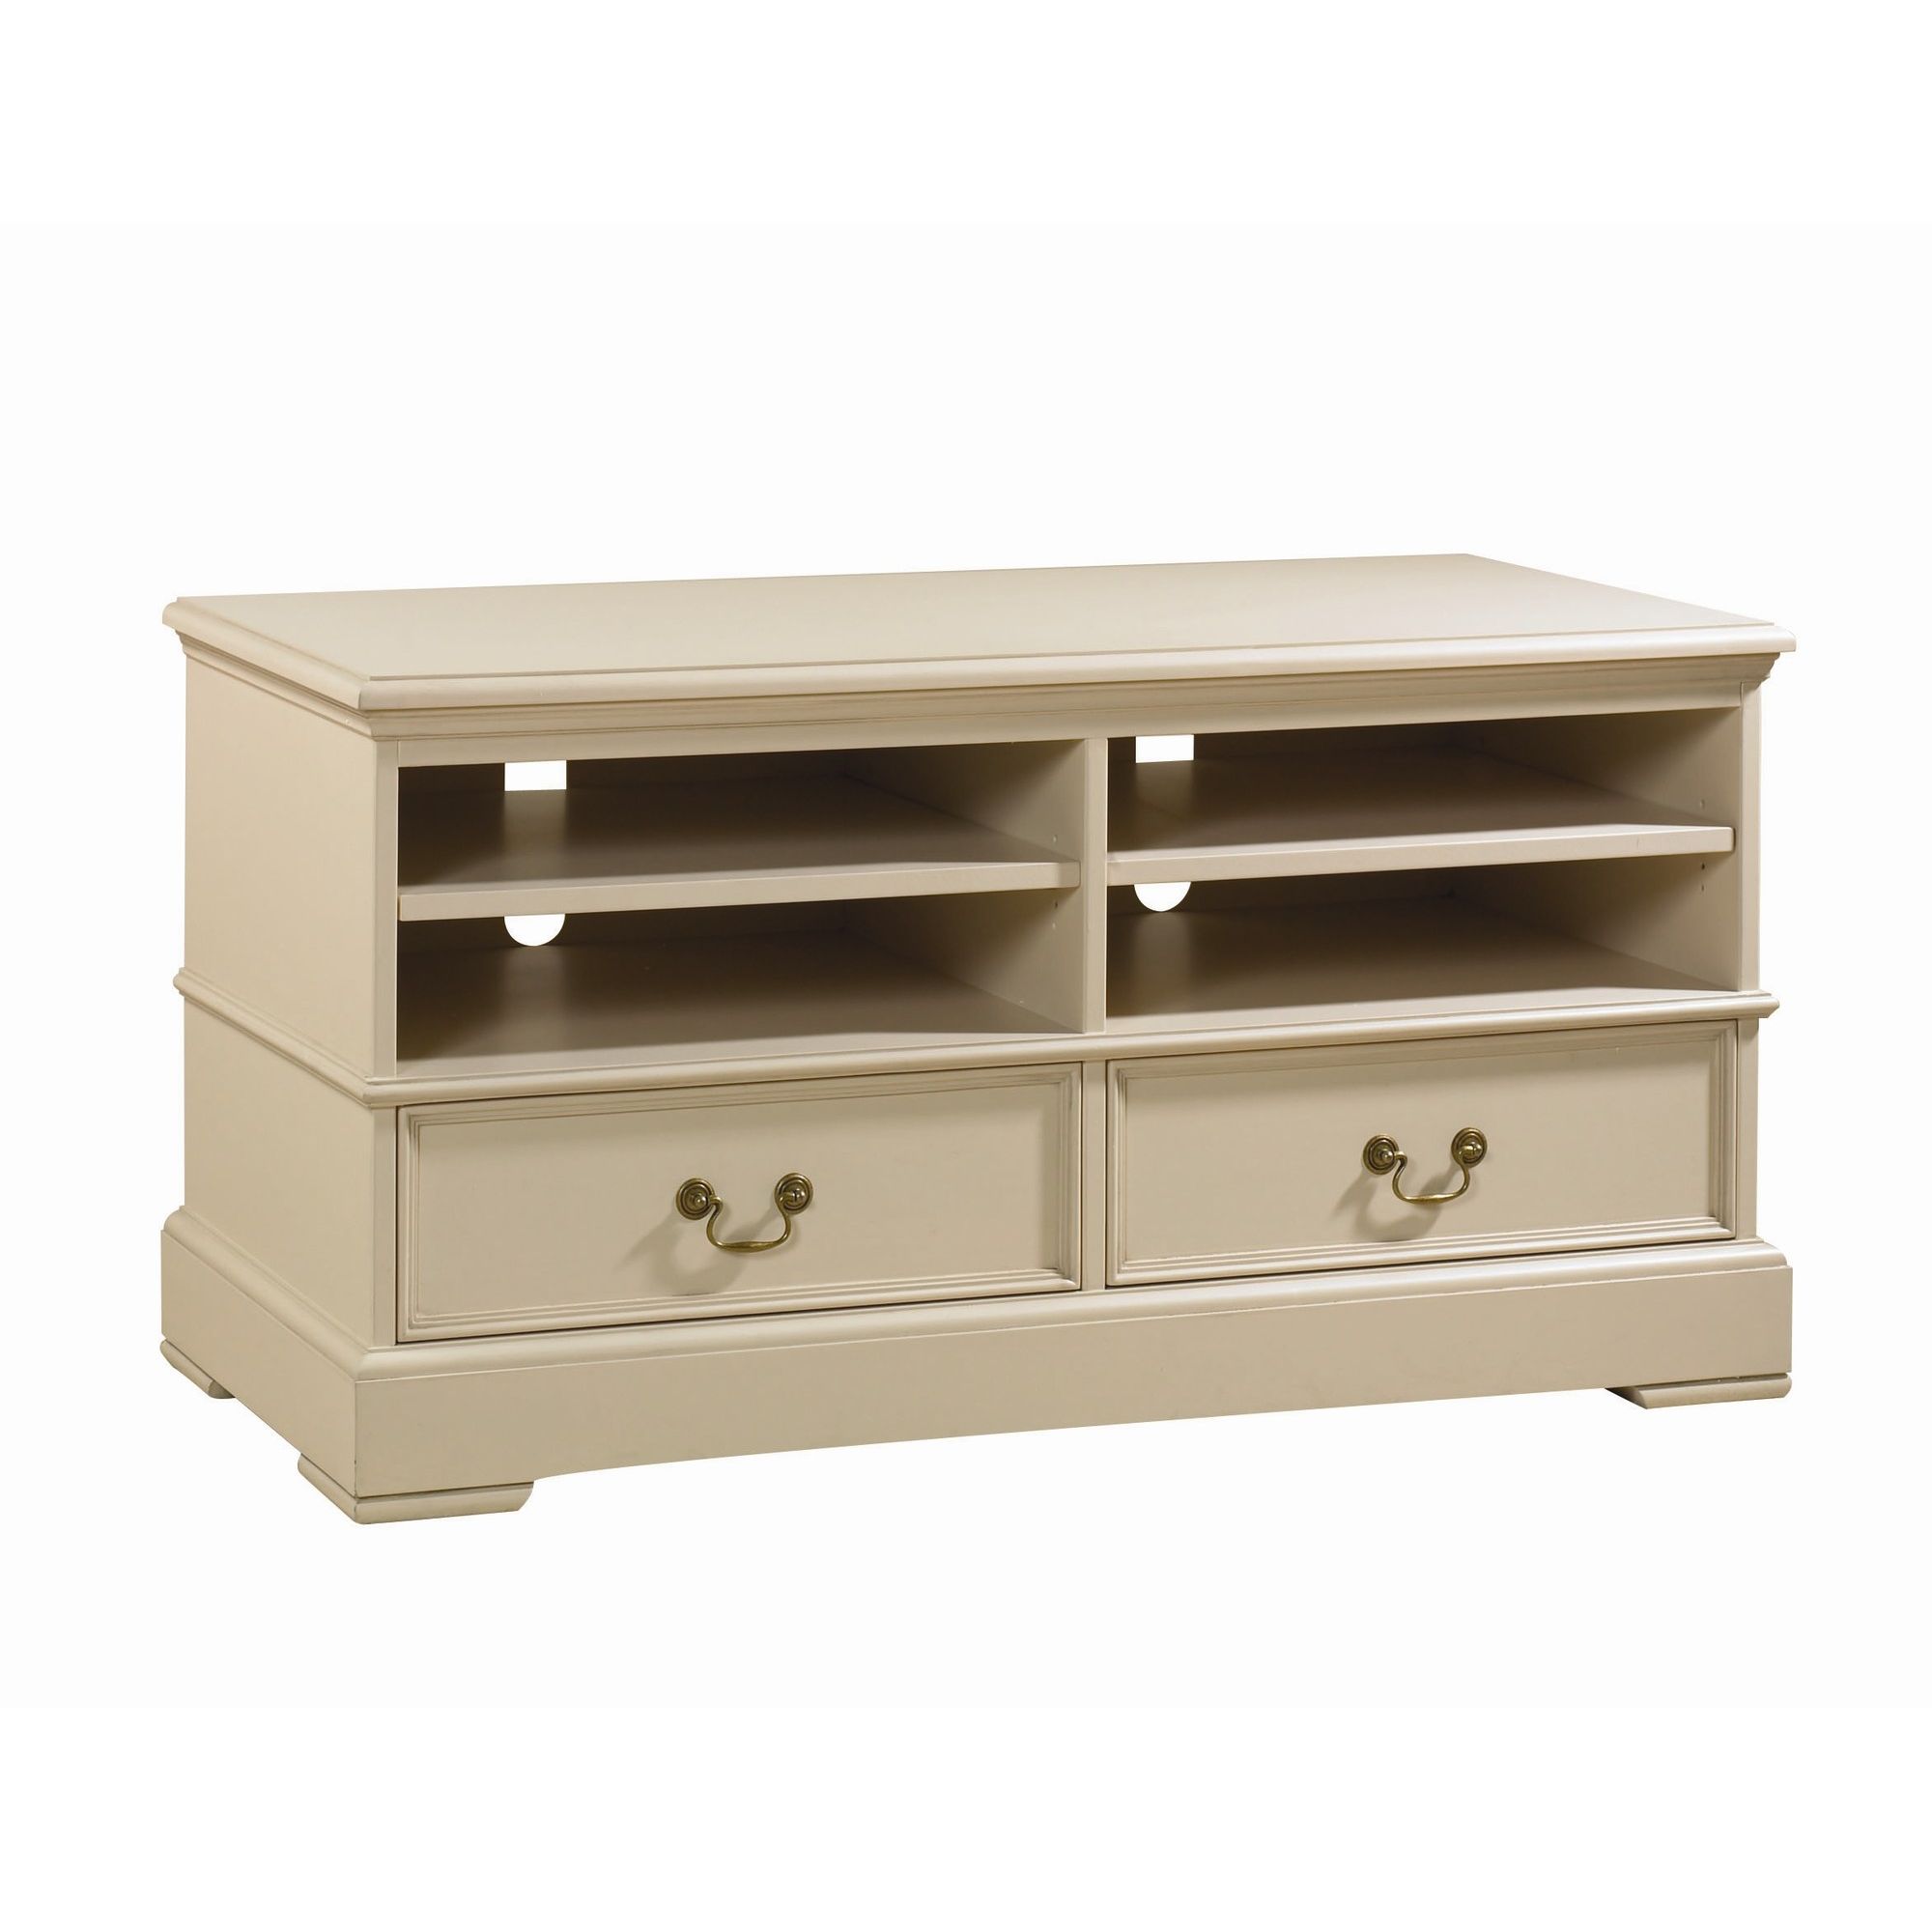 YP Furniture Country House TV Unit - Ivory at Tescos Direct